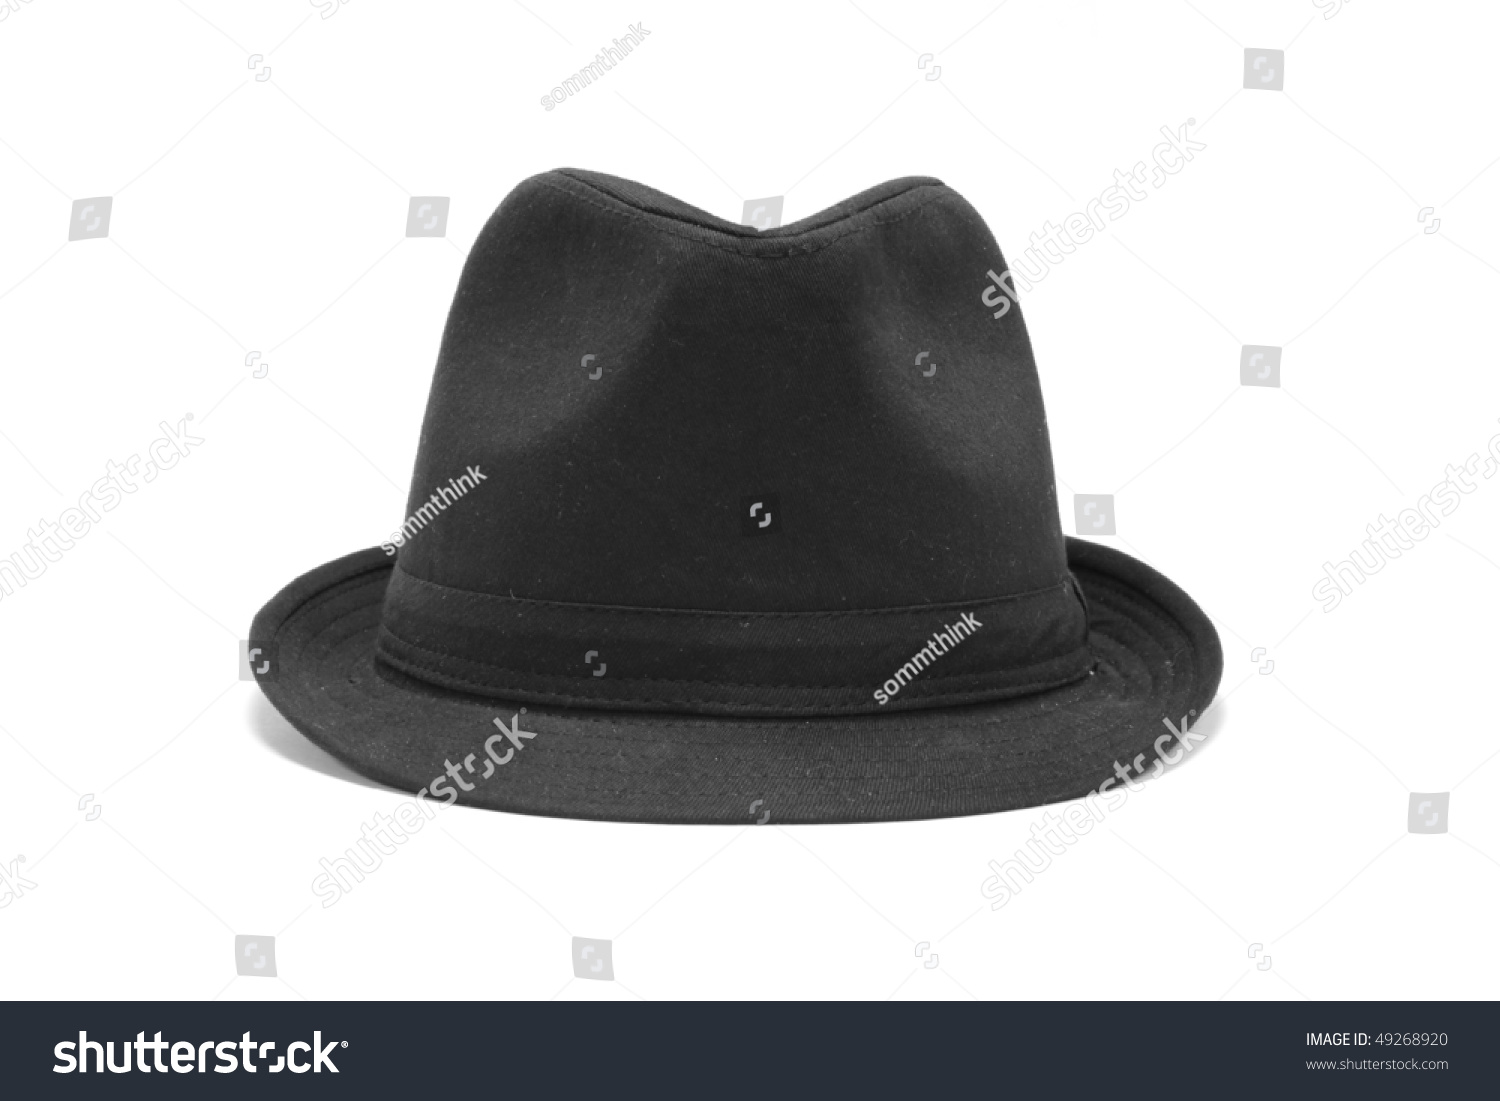 black hat on the white background #49268920